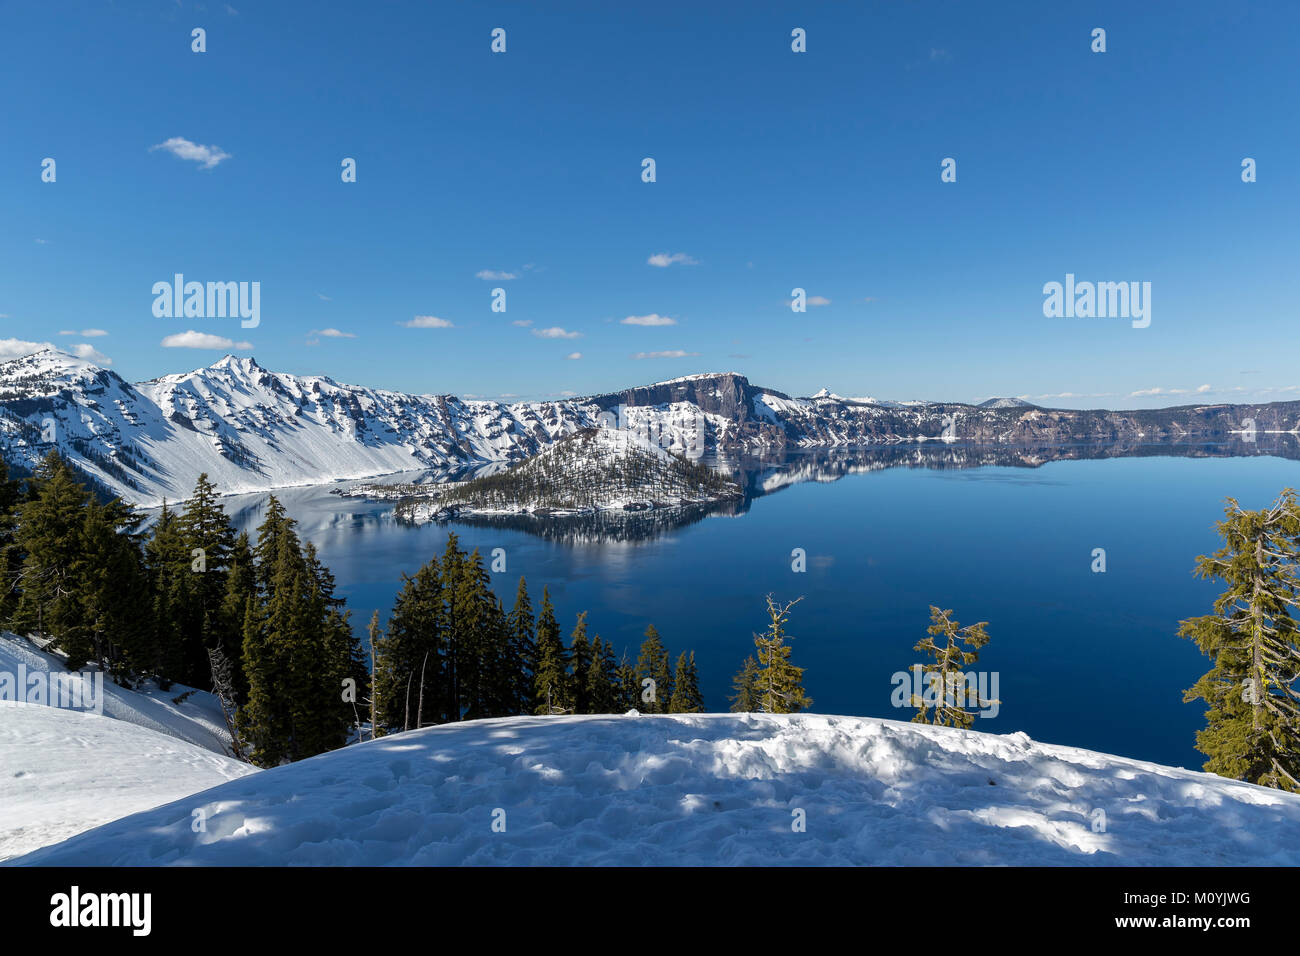 Scenic view of Crater Lake, Oregon, United States Stock Photo